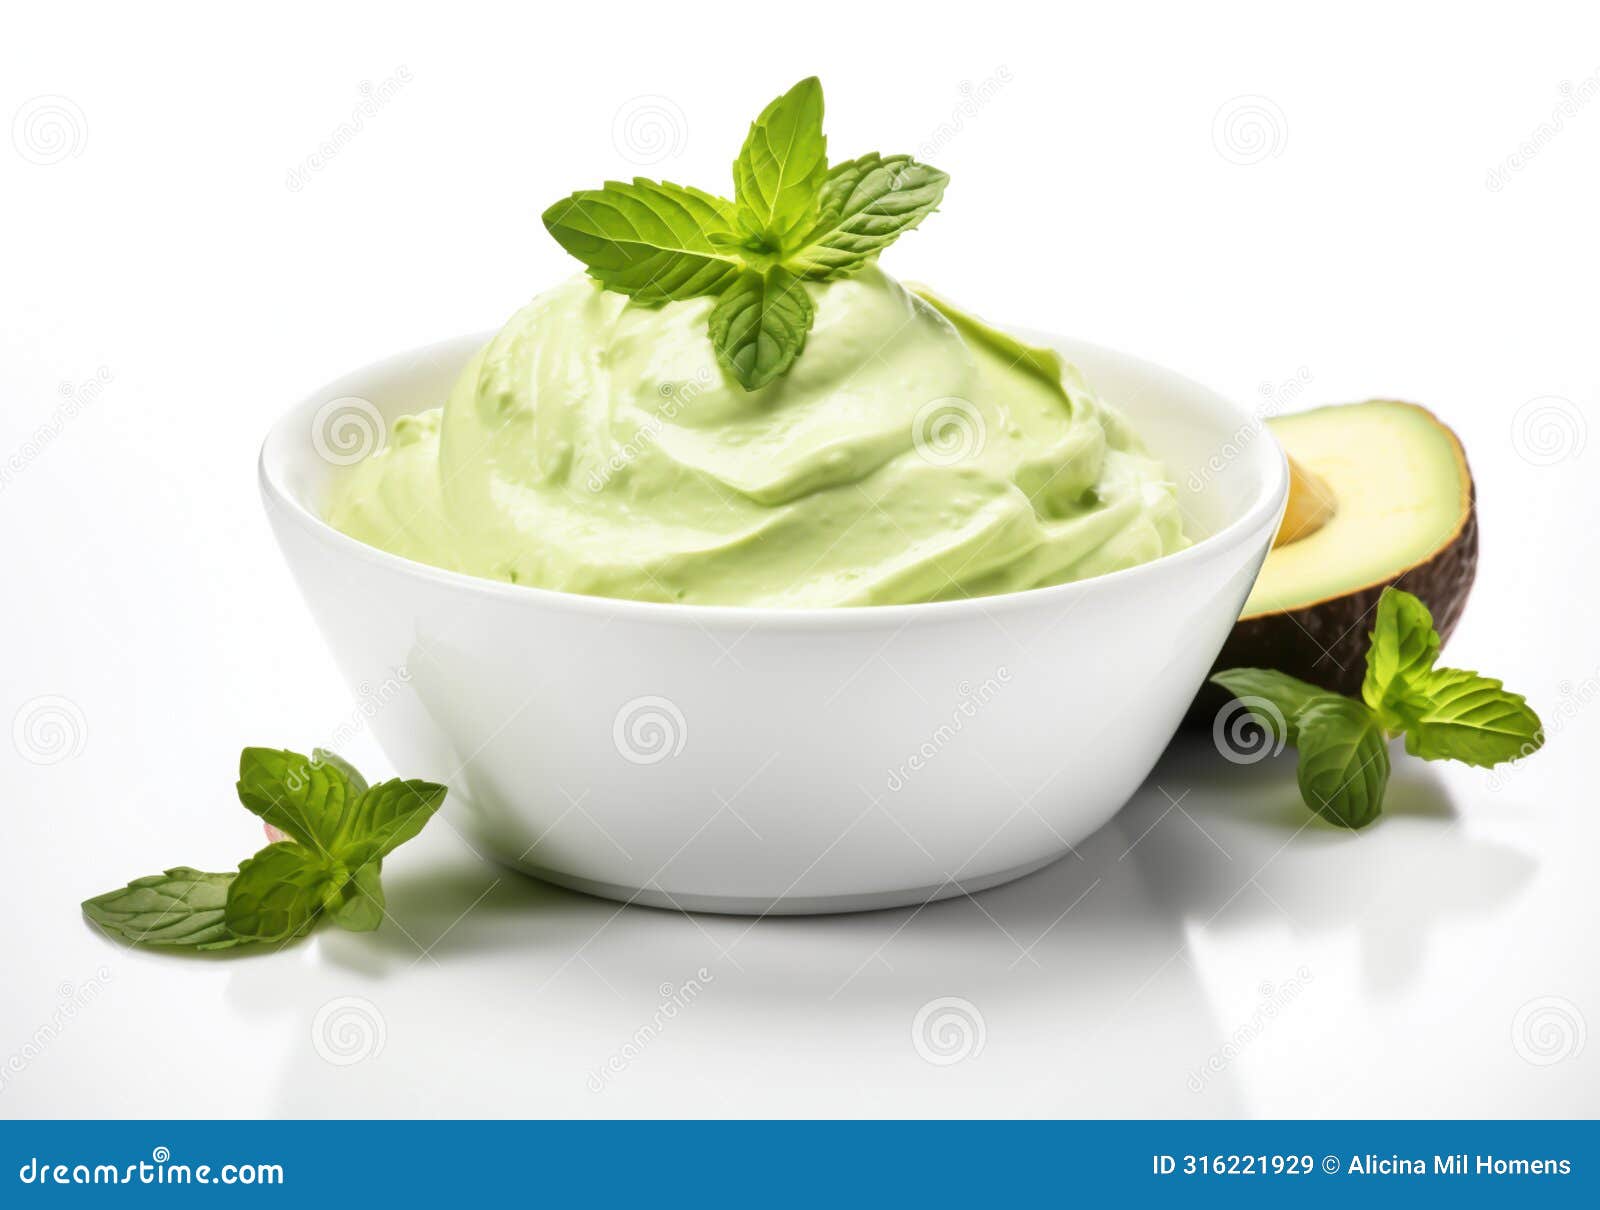 guacamole, delicious avocado sauce widely used in cooking, for healthy eating